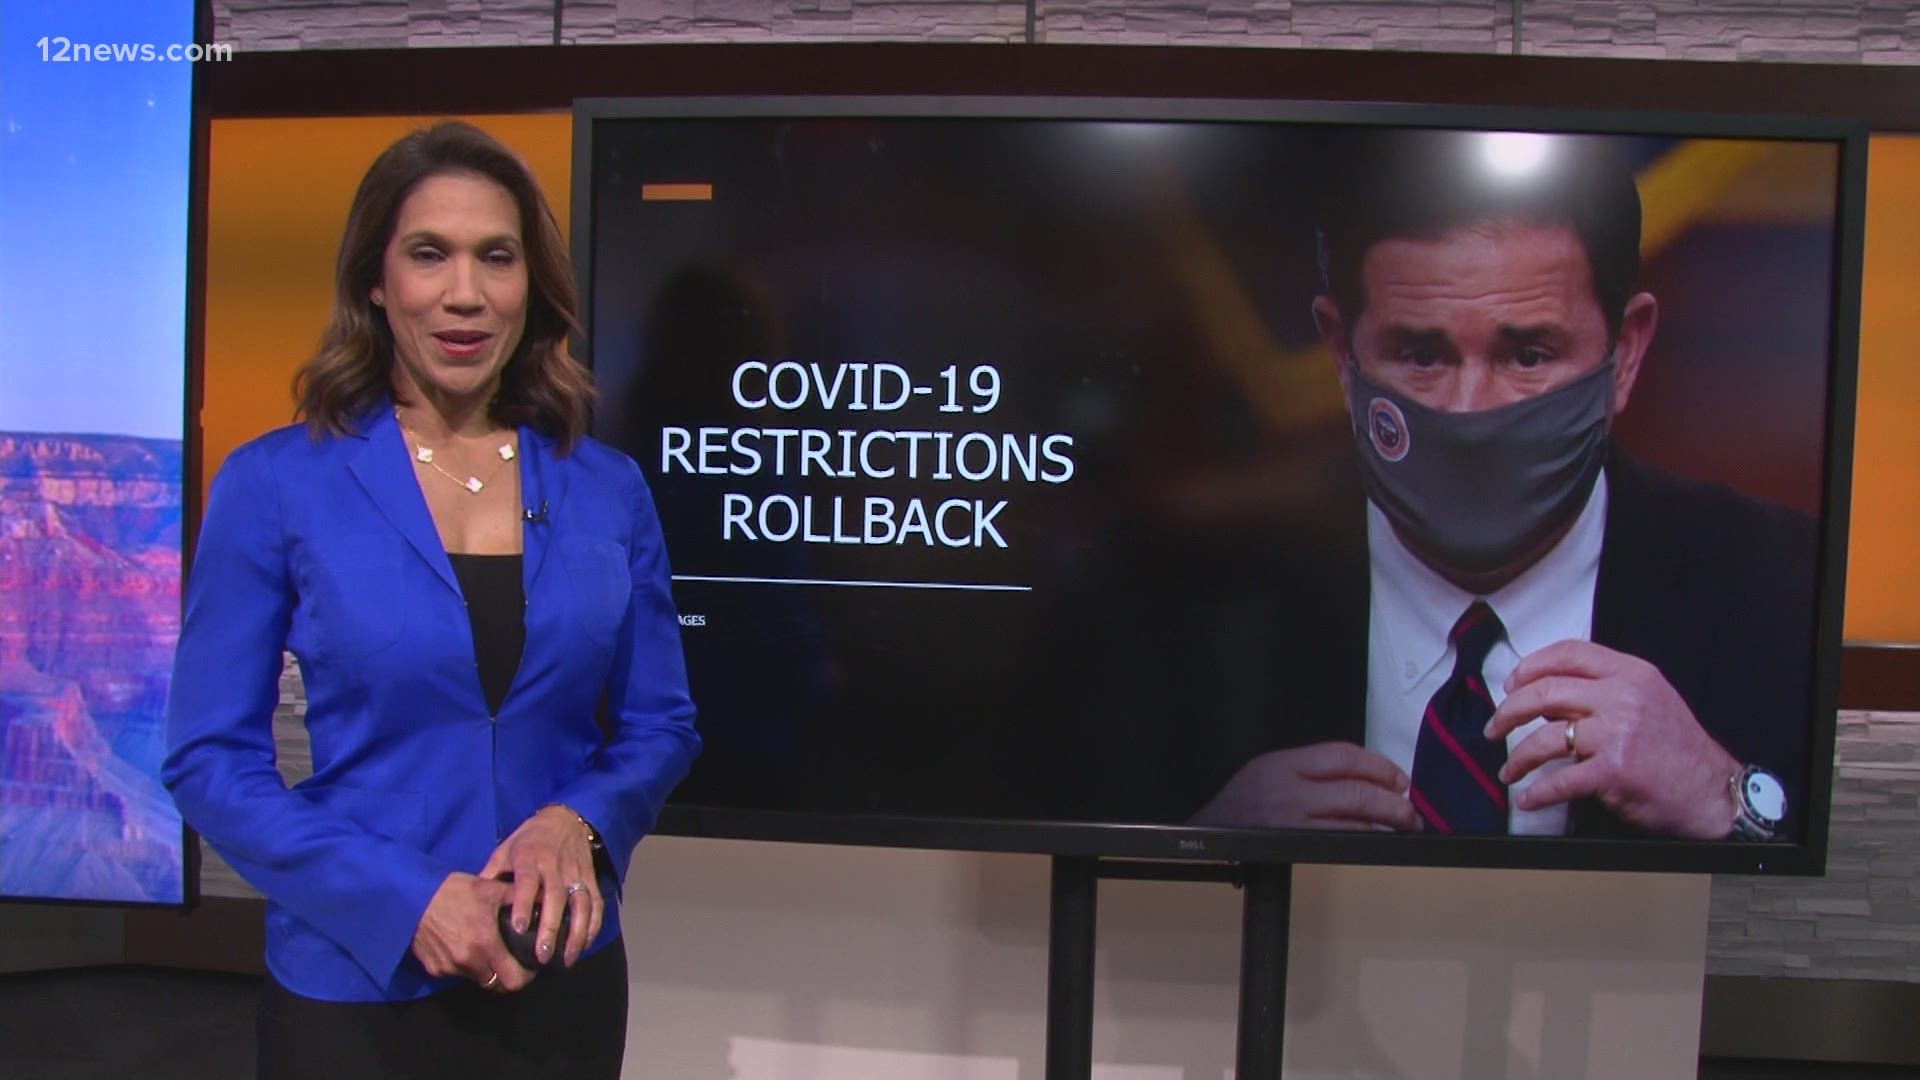 What do you think about Gov. Doug Ducey's decision to roll back COVID-19 restrictions? We asked and Team 12's Rachel McNeill is reading your answers.